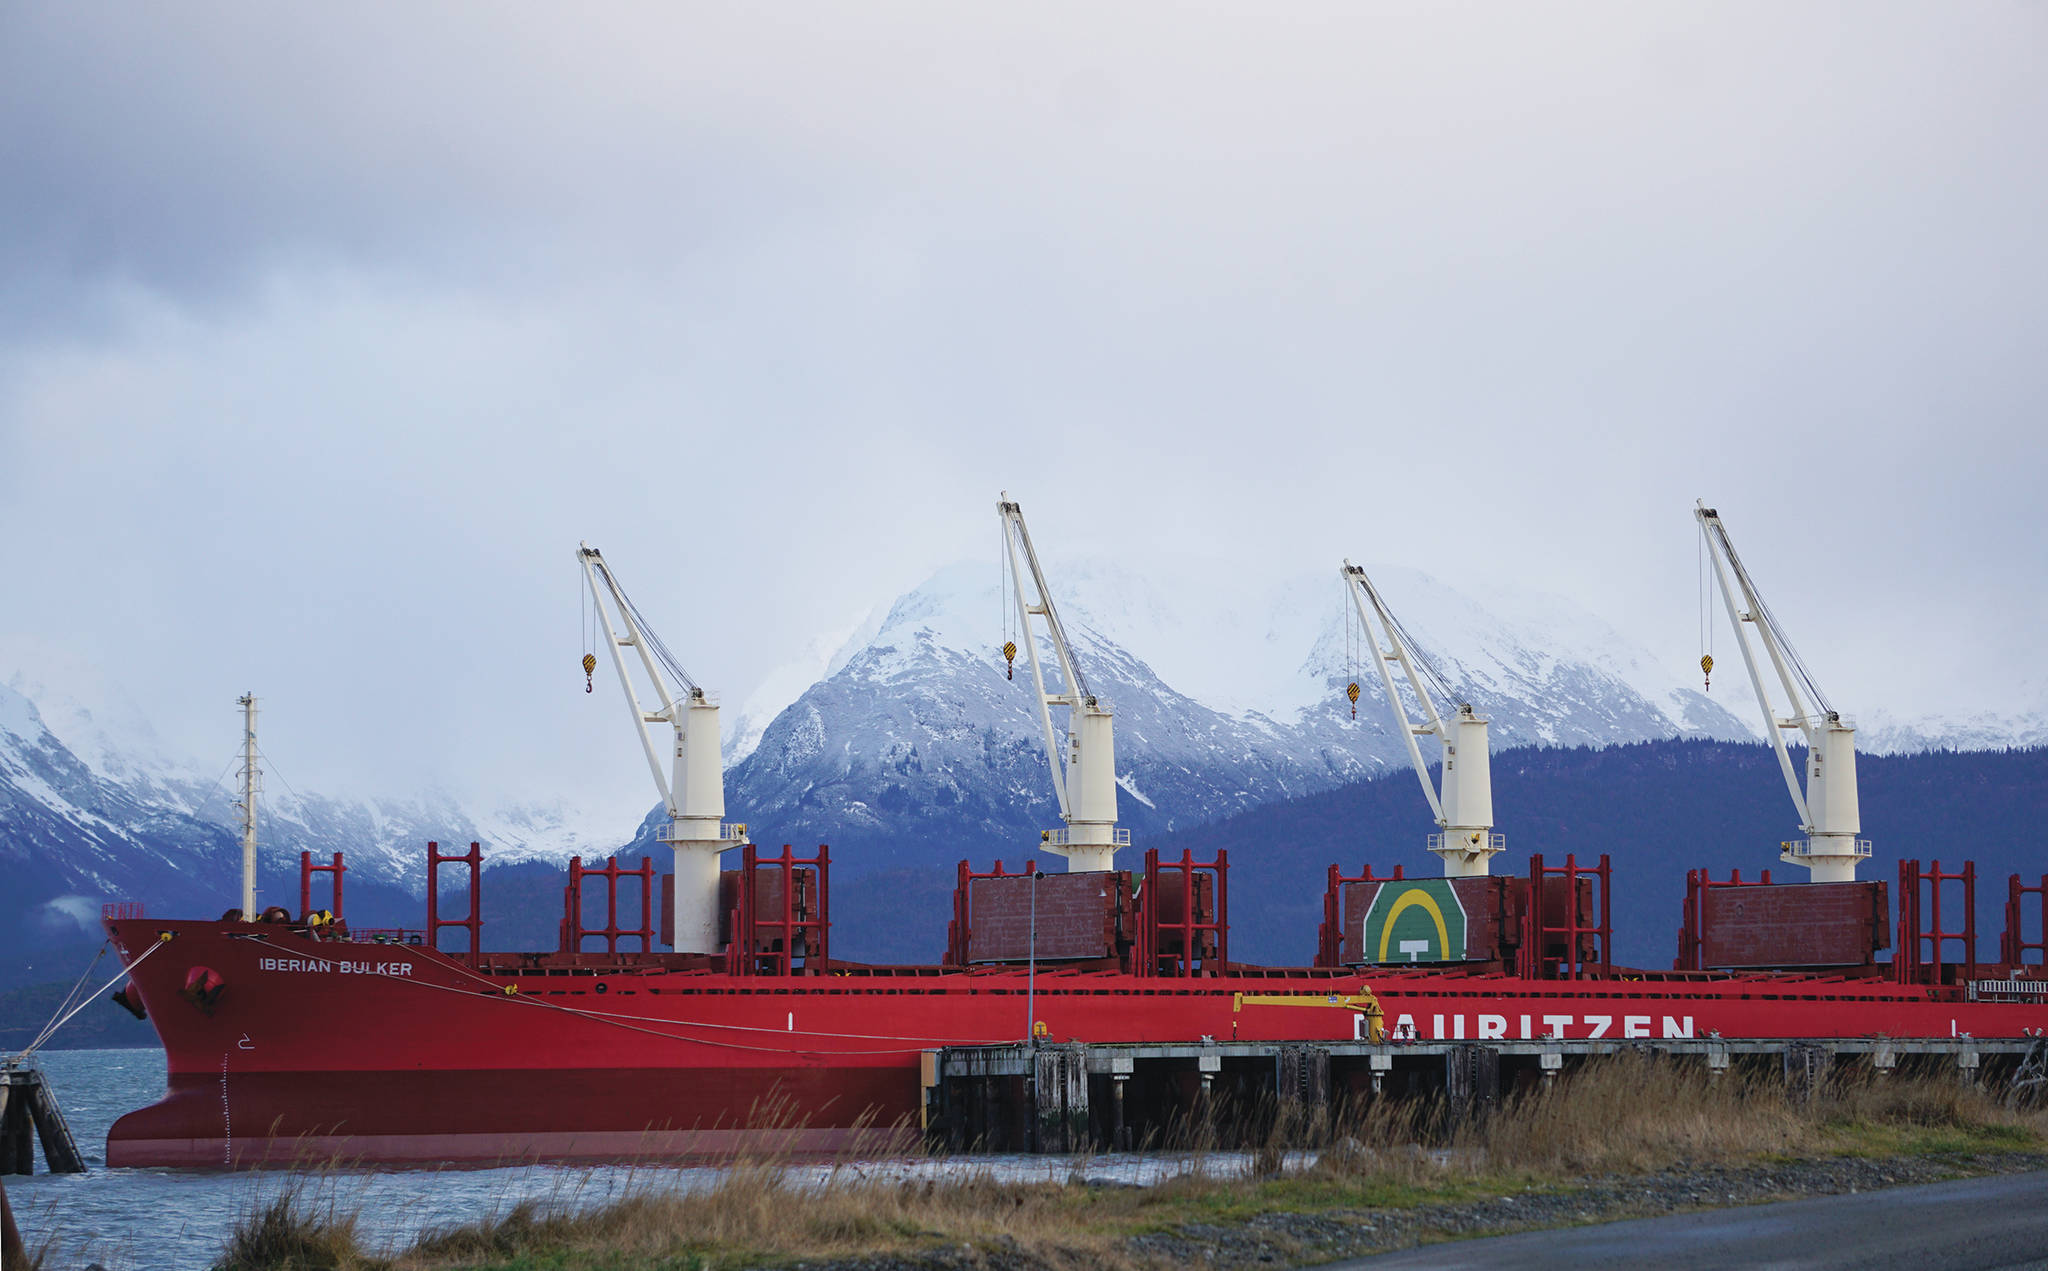 The Iberian Bulker is moored at the Deep Water Dock on Tuesday, Dec. 17, 2019, in Homer, Alaska, while being loaded with 22,000 metric tons of sulfur to be shipped to China. (Photo by Michael Armstrong/Homer News)